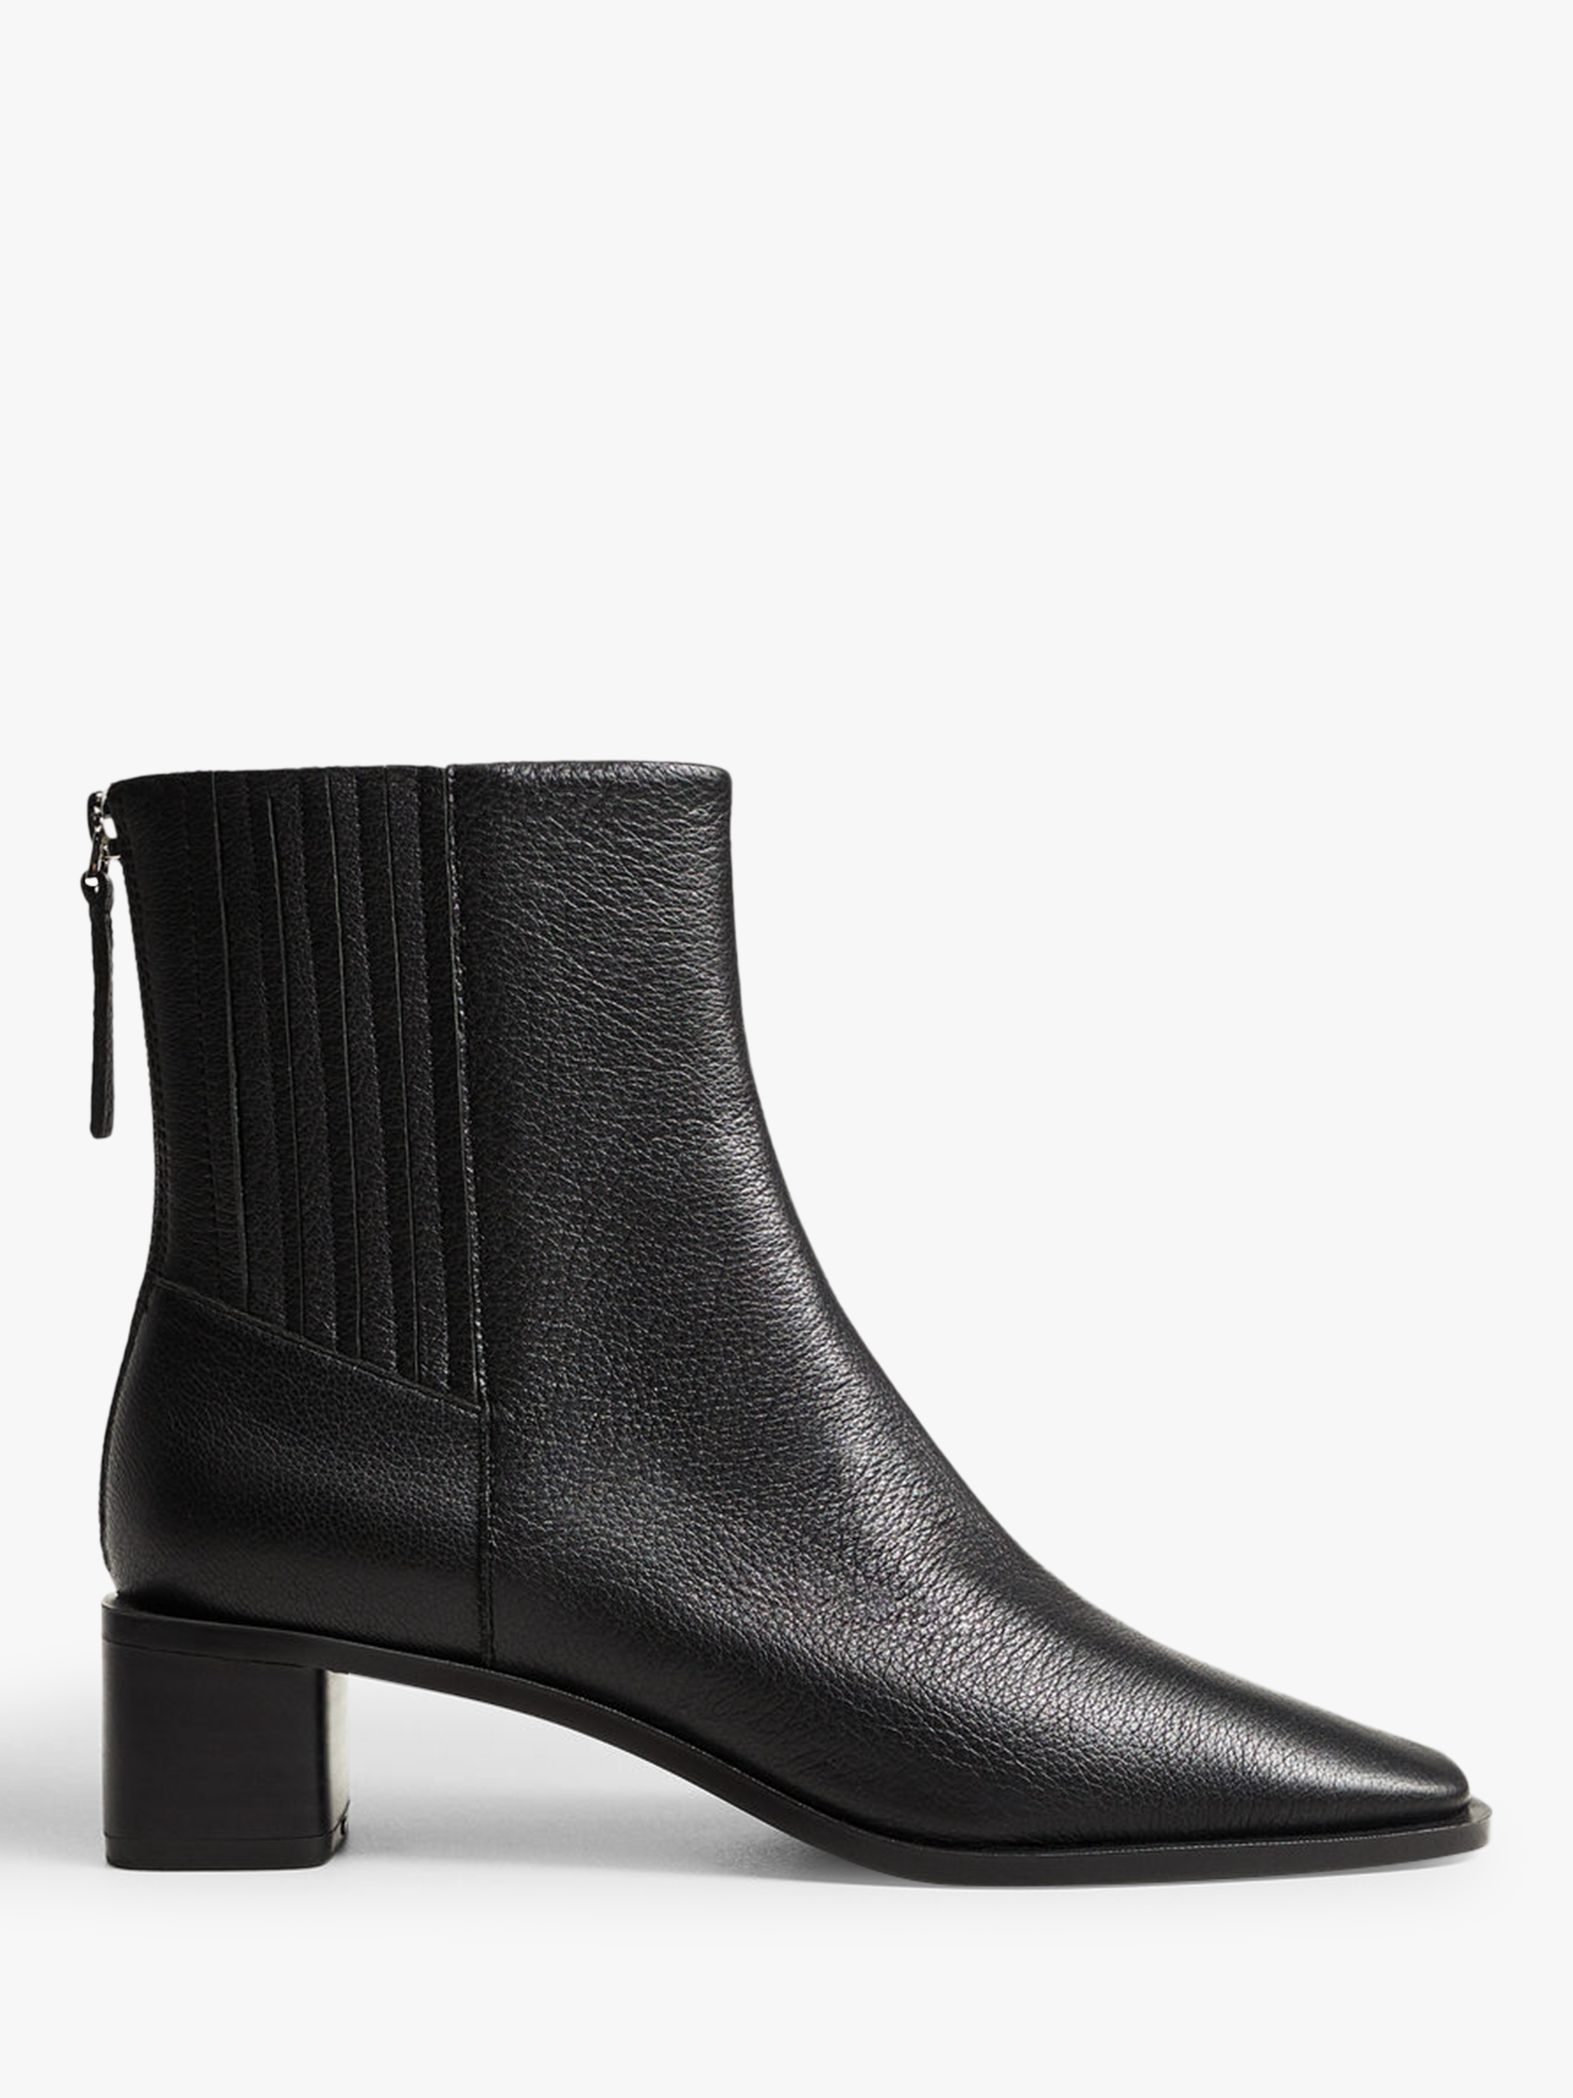 Mango Leather Pointed Toe Ankle Boots, Black at John Lewis & Partners